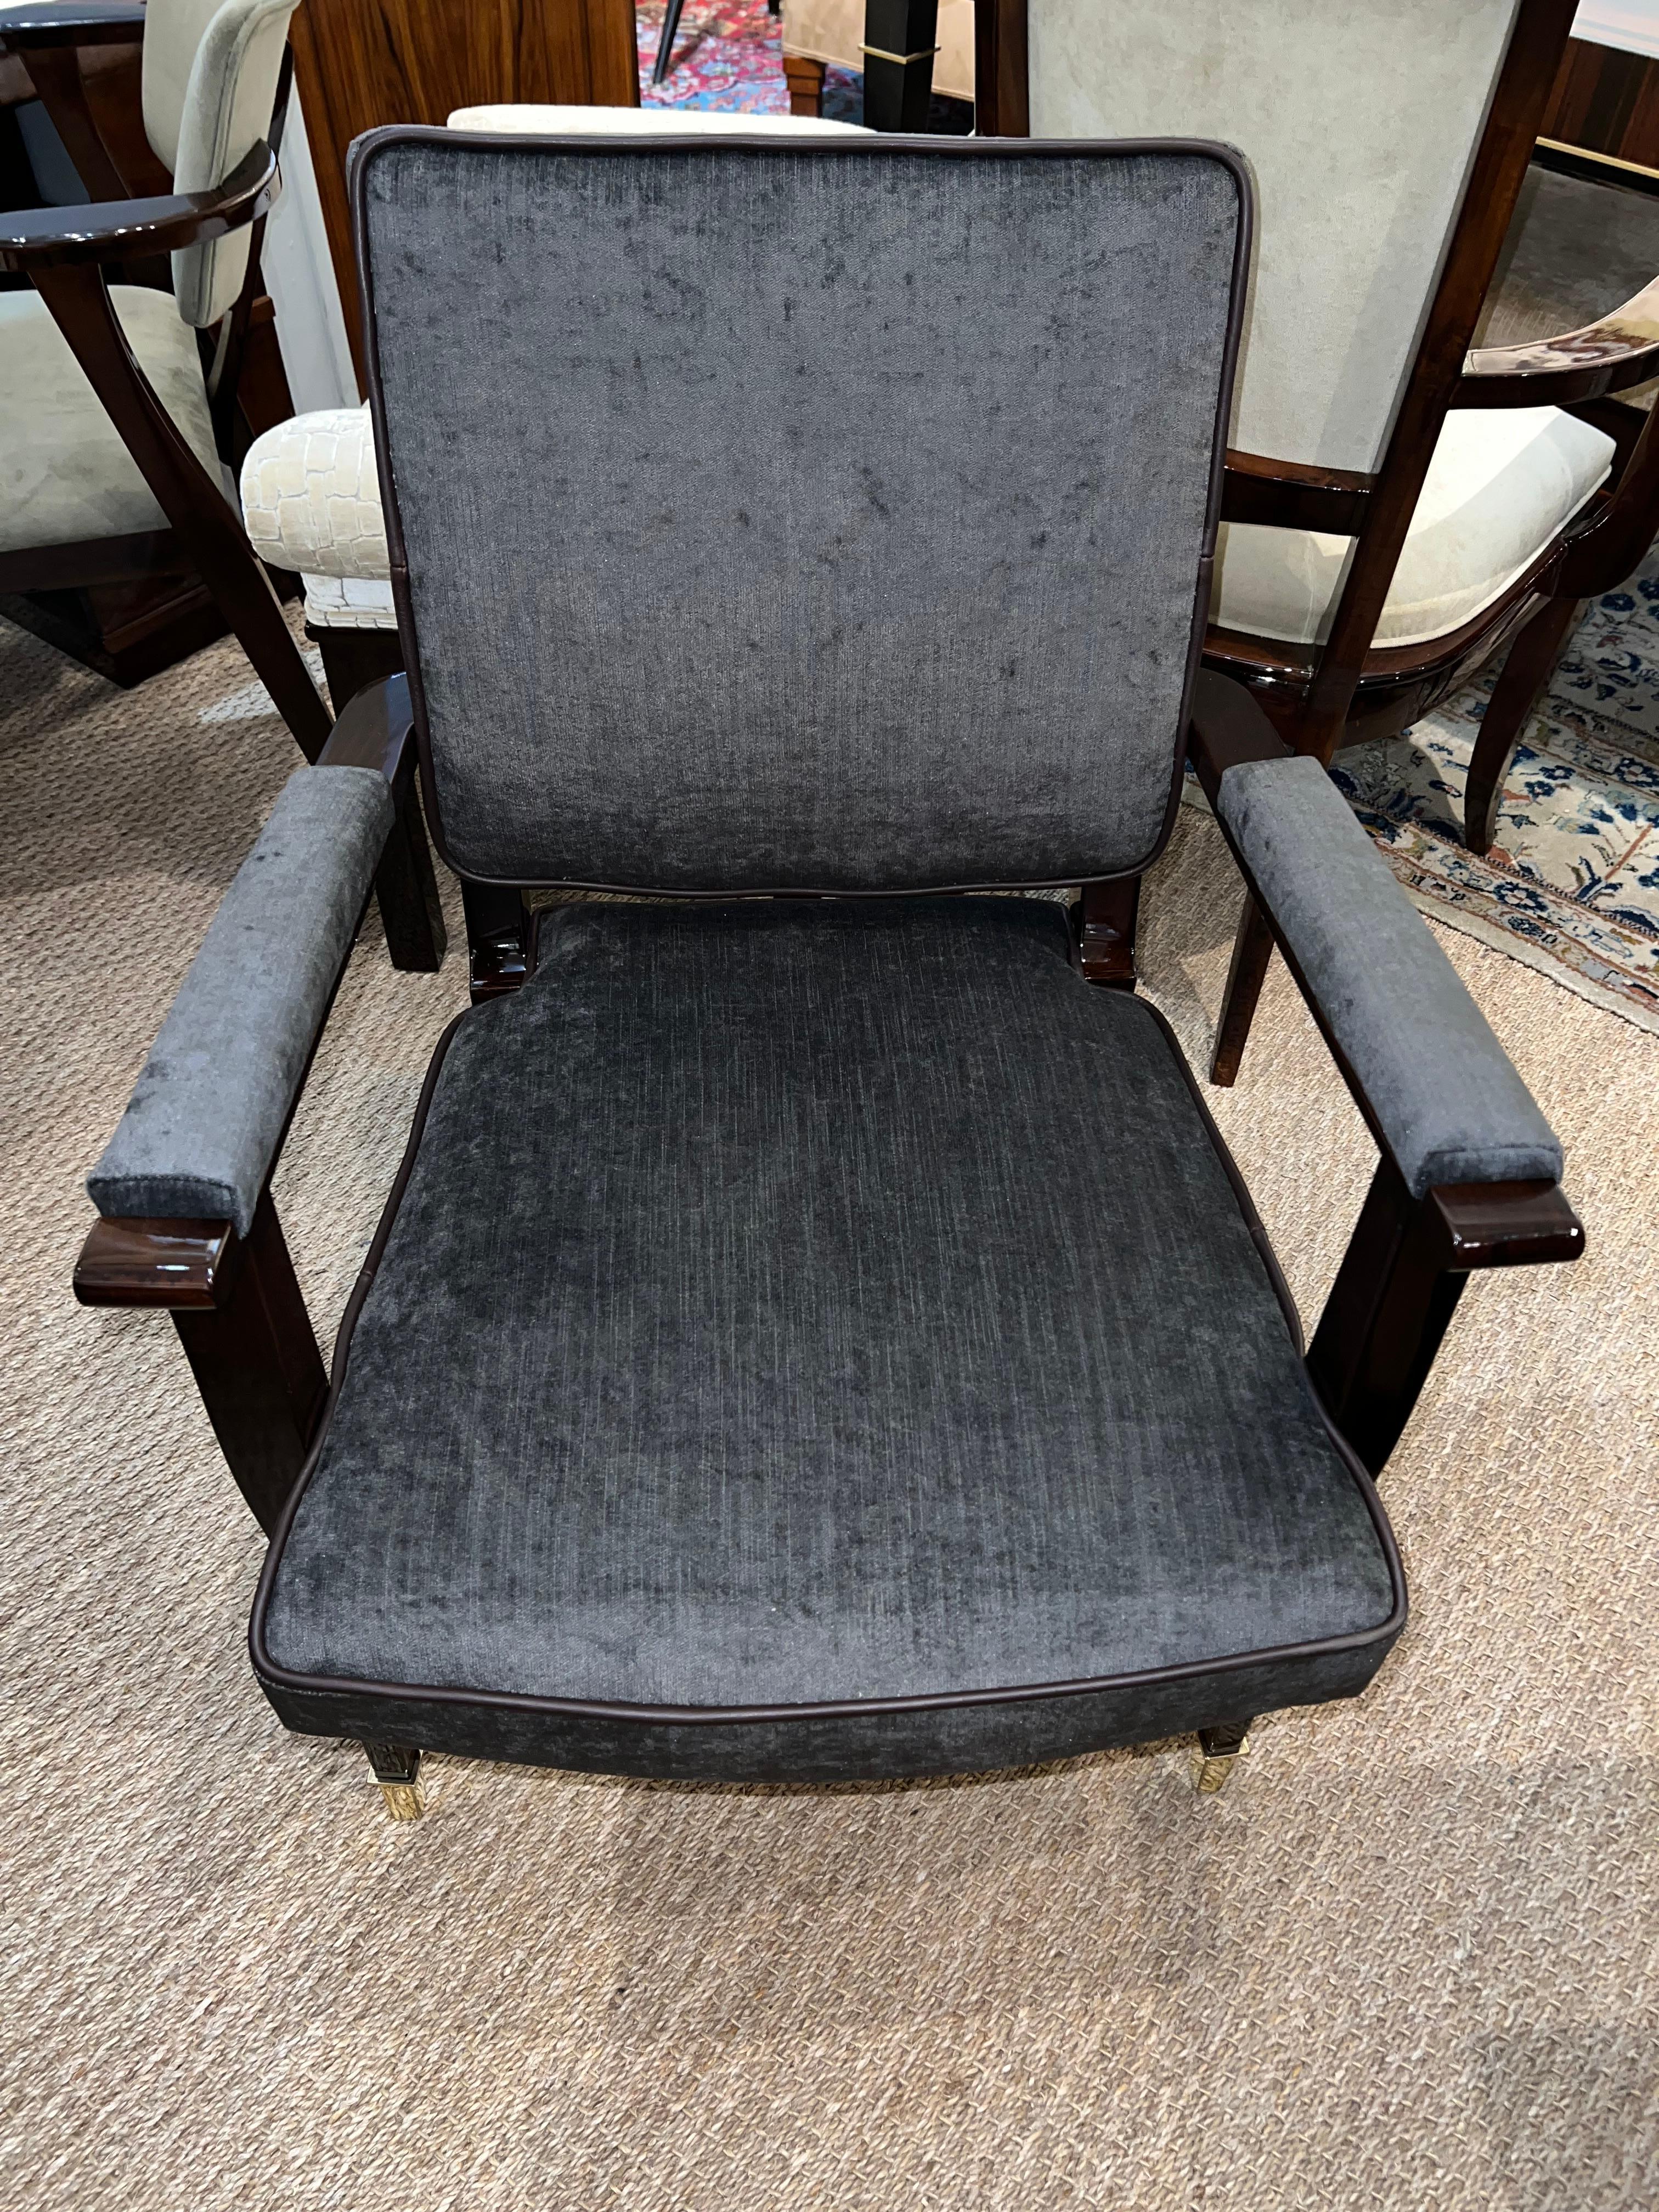 Comfortable desk chair is from Art deco period France. Newly re-upholstered in dark grey fabric and re-polished. Chair has leather piping on the edges of the chair. Two front legs tips are wrapped in brass tips. 

Condition is prefect. Restored
23